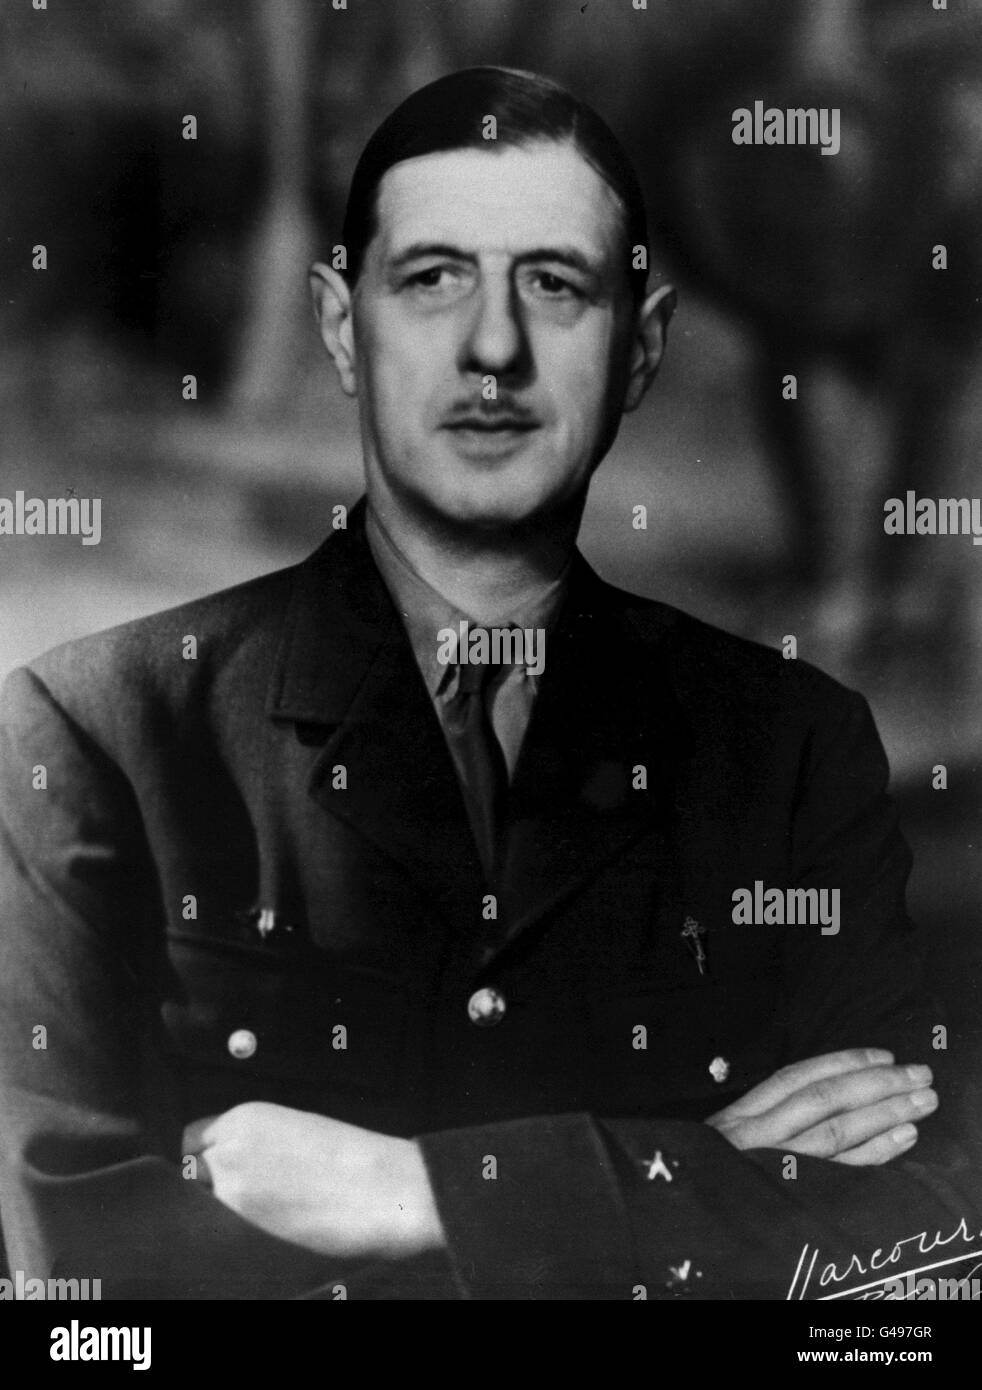 PA NEWS PHOTO 14/5/58 GENERAL CHARLES DE GAULLE WARTIME LEADER OF THE FREE FRENCH Stock Photo